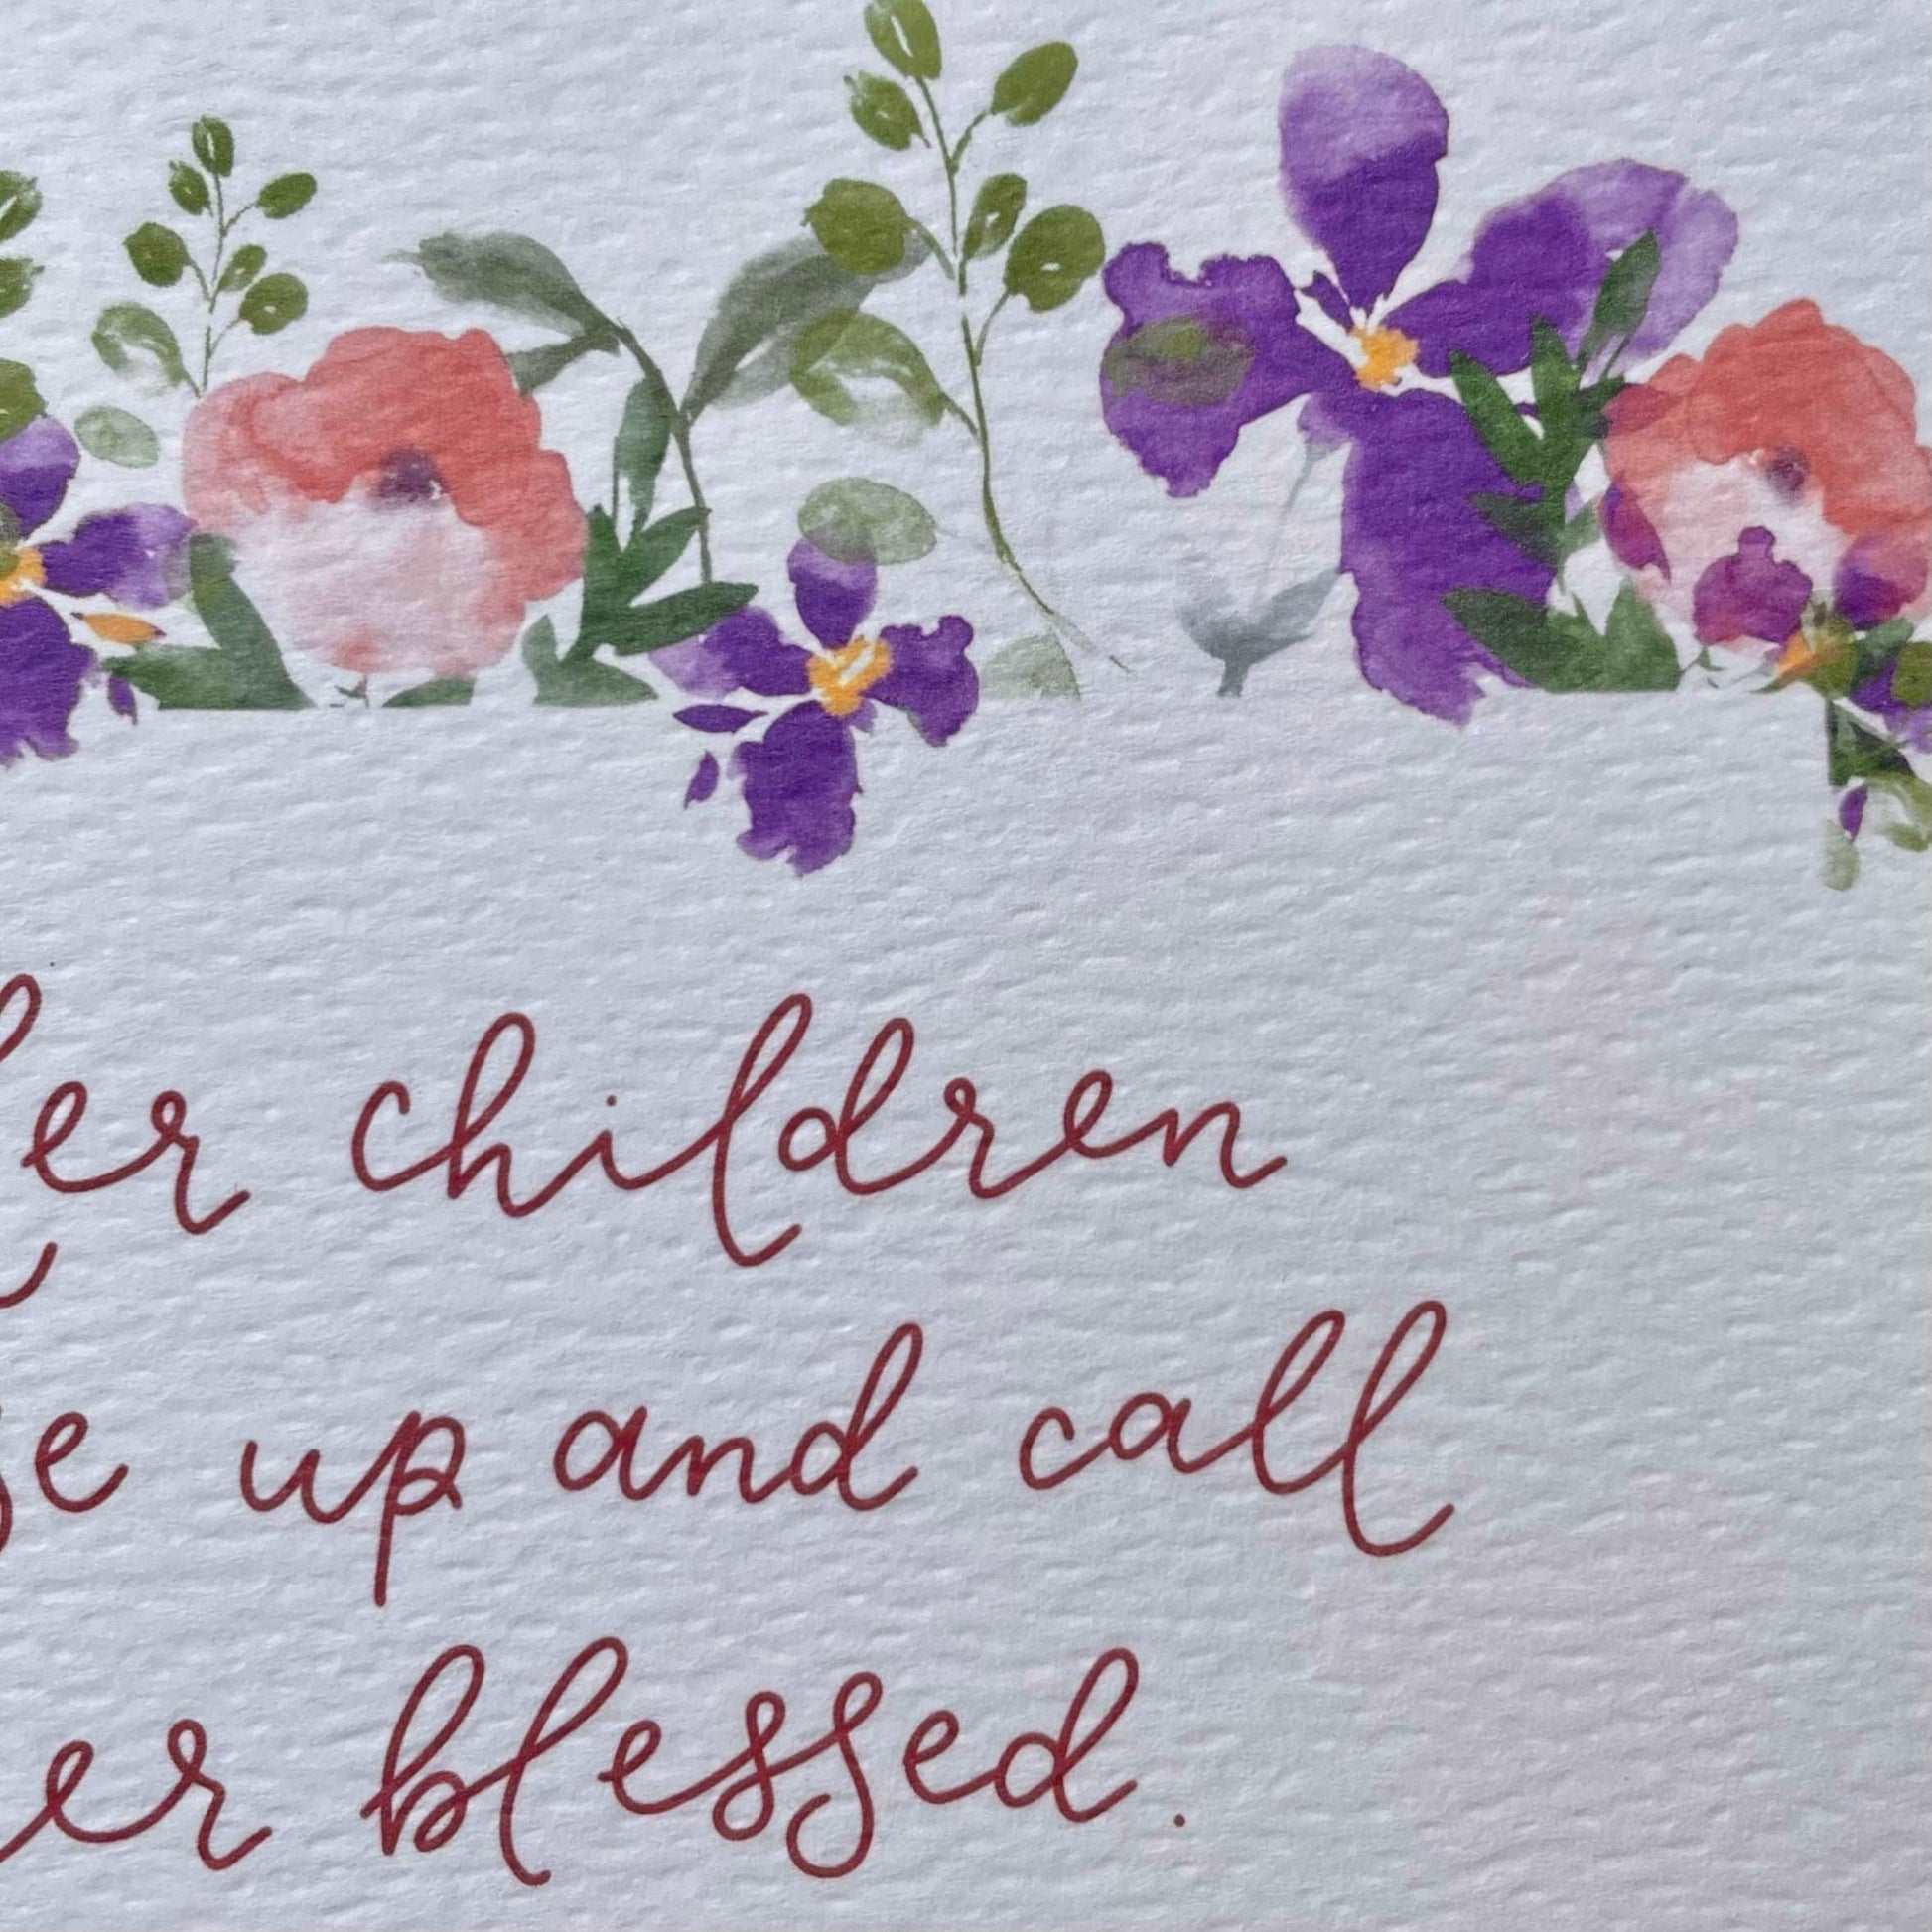 Christian Card for mum - Mother’s Day (or any day!) Proverbs 31:28 And Hope Designs Cards